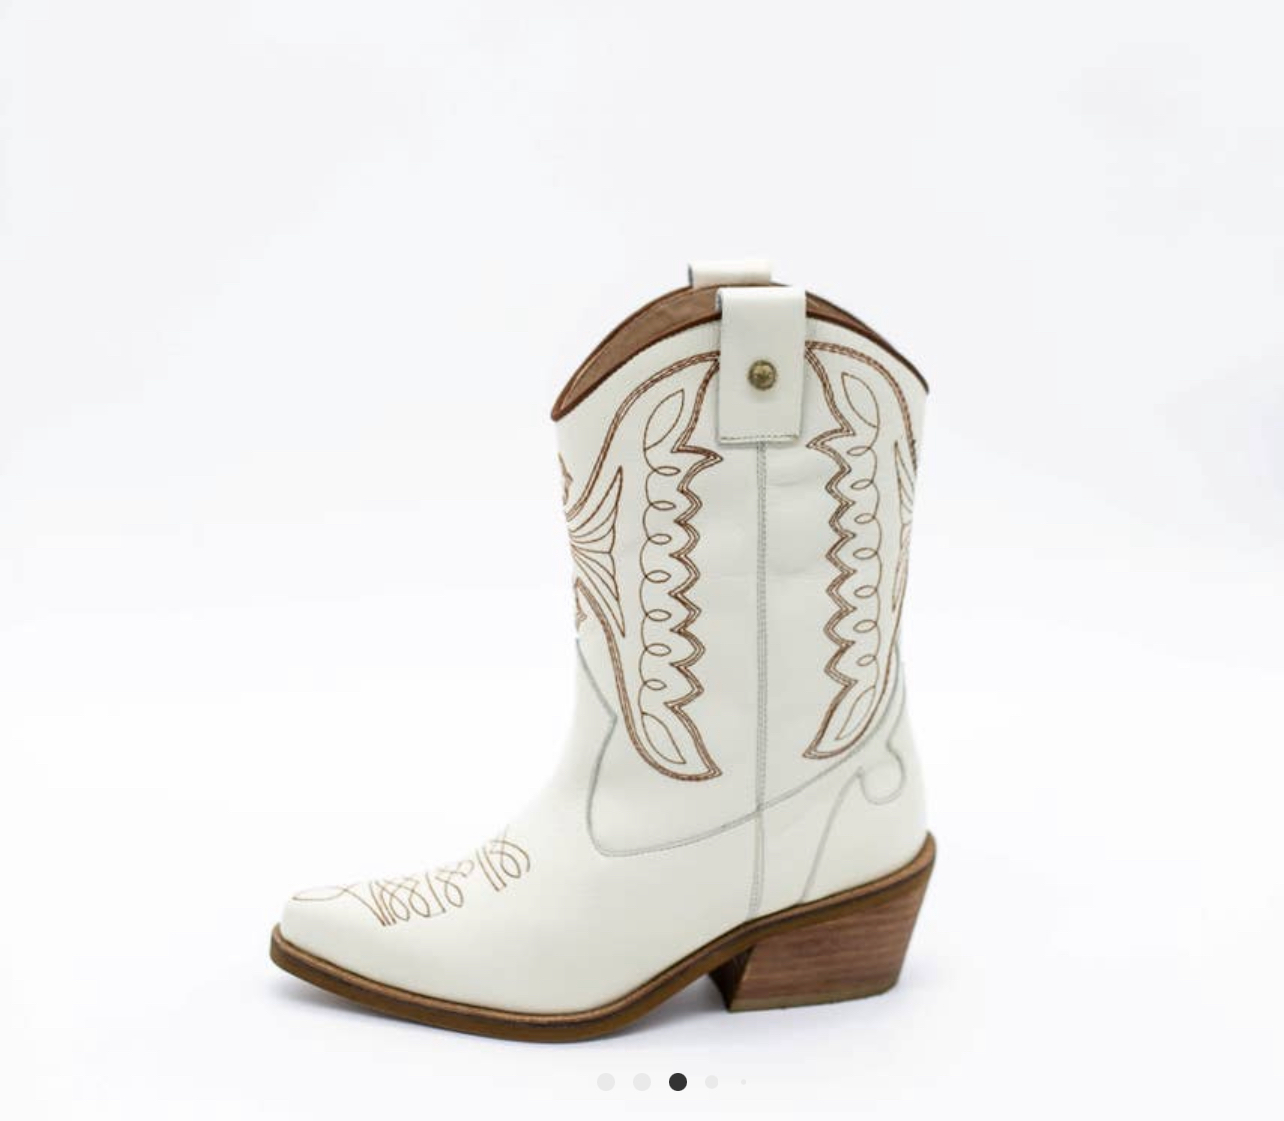 Unstoppable Cowboy boots in ivory leather